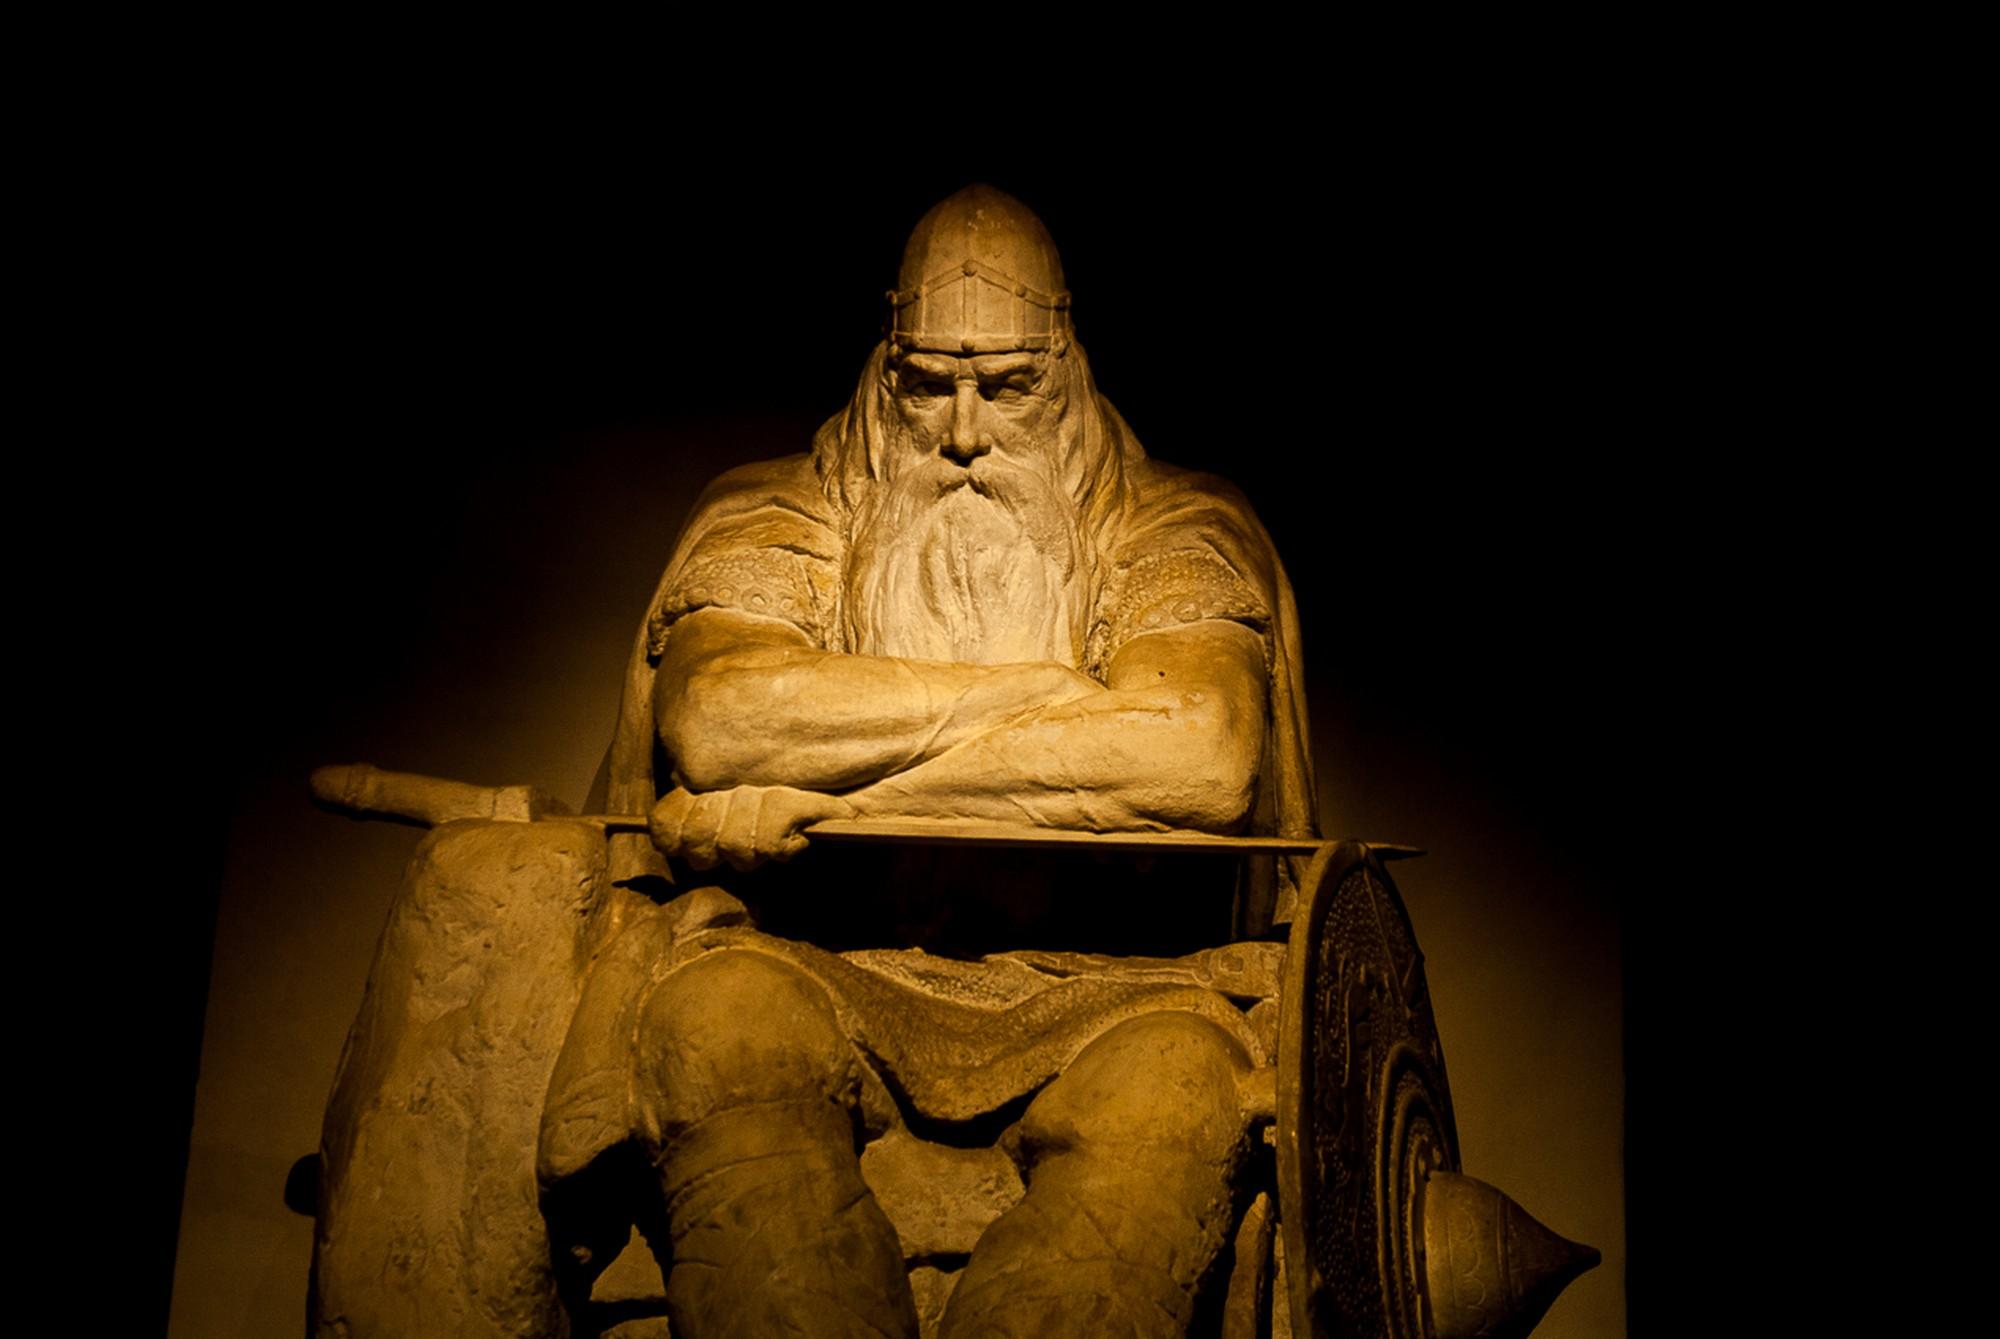 Holger the Dane is said to awaken when Denmark is under threat. Sleeping slumped in his chair by the passageway to the dark, dank casemates, he is a symbol of pride for Danish people. – © Thomas Rahbek